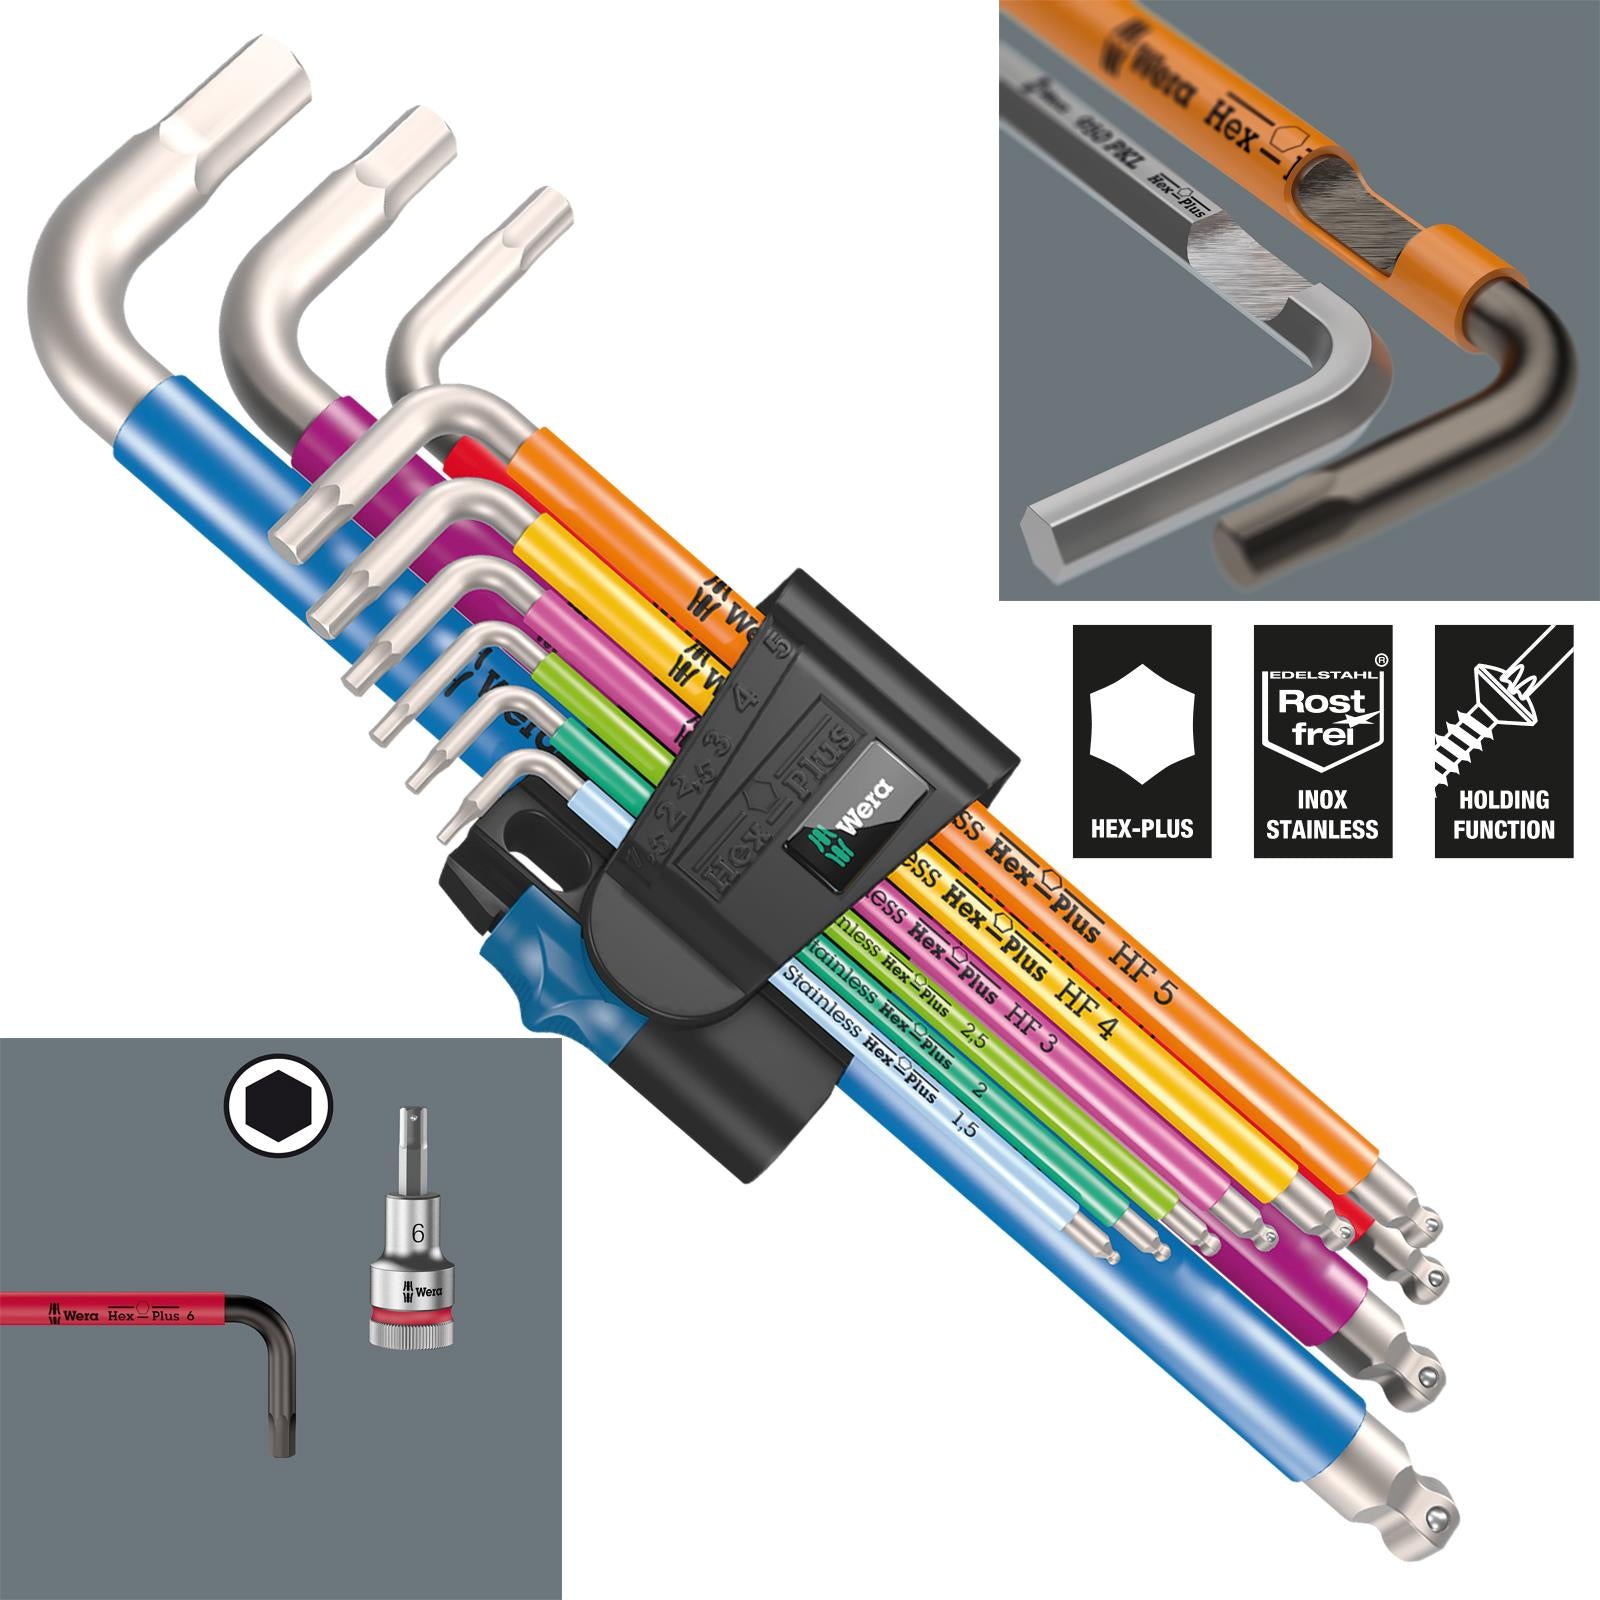 Wera Hex Key Set 3950/9 Multicolour HF Stainless Steel 1 L-Key Metric Holding Function 9 Piece 1.5-10mm